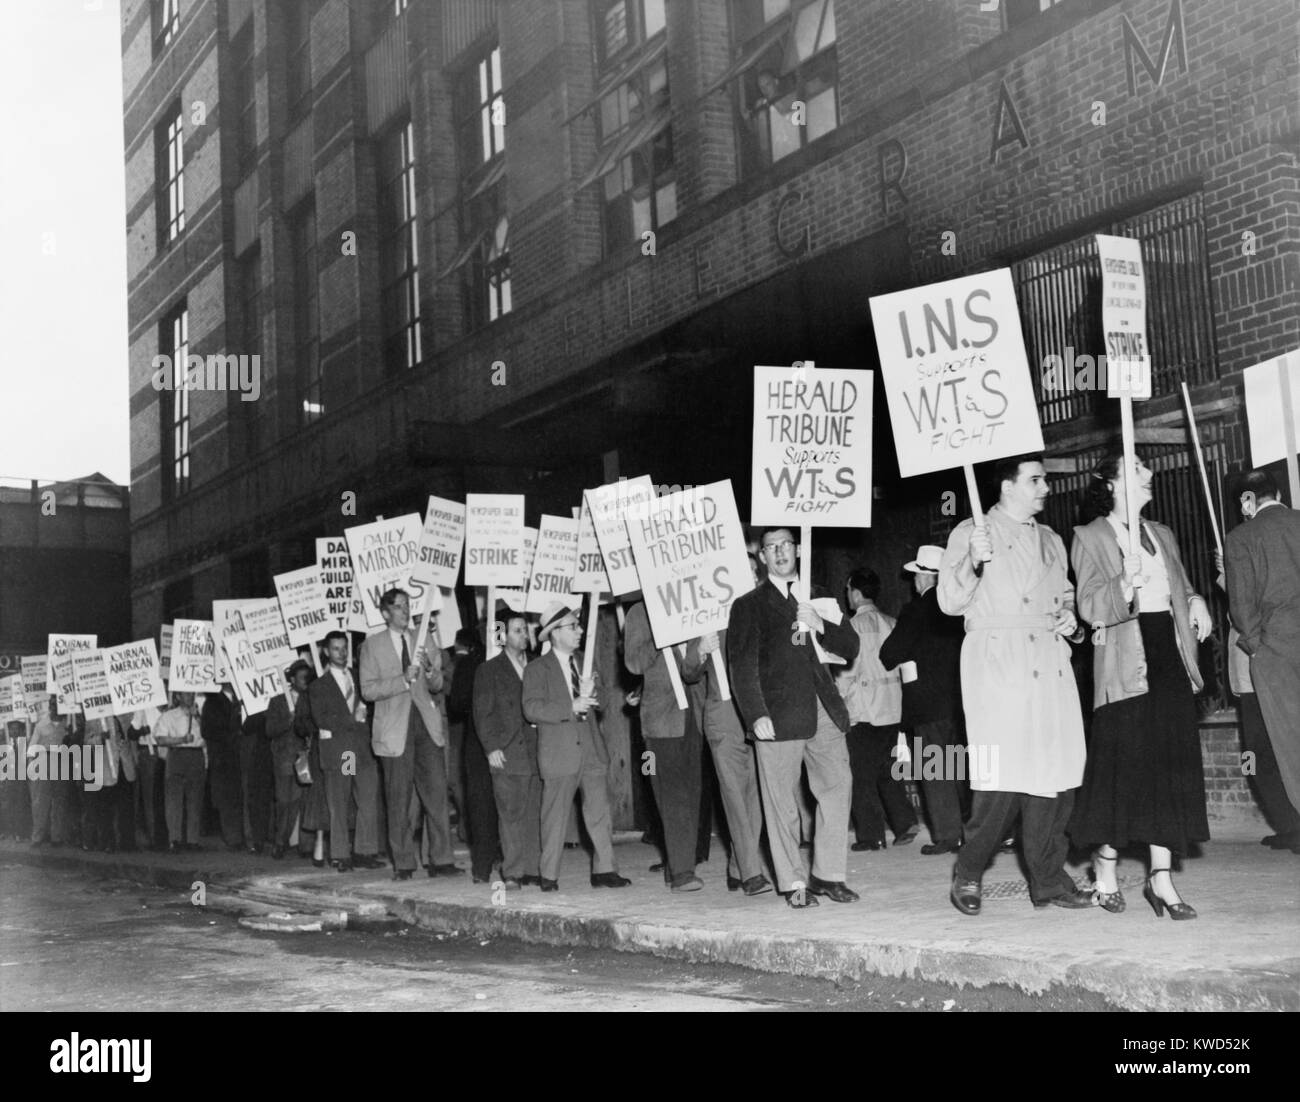 Picket line of the Newspaper Guild of New York in 1950. The journalist's union shut down the Scripps Howard's 'New York World-Telegram and the Sun' for 71 days. The crafts unions supported their strike, a factor critical in the strike's success. (BSLOC 2014 13 240) Stock Photo